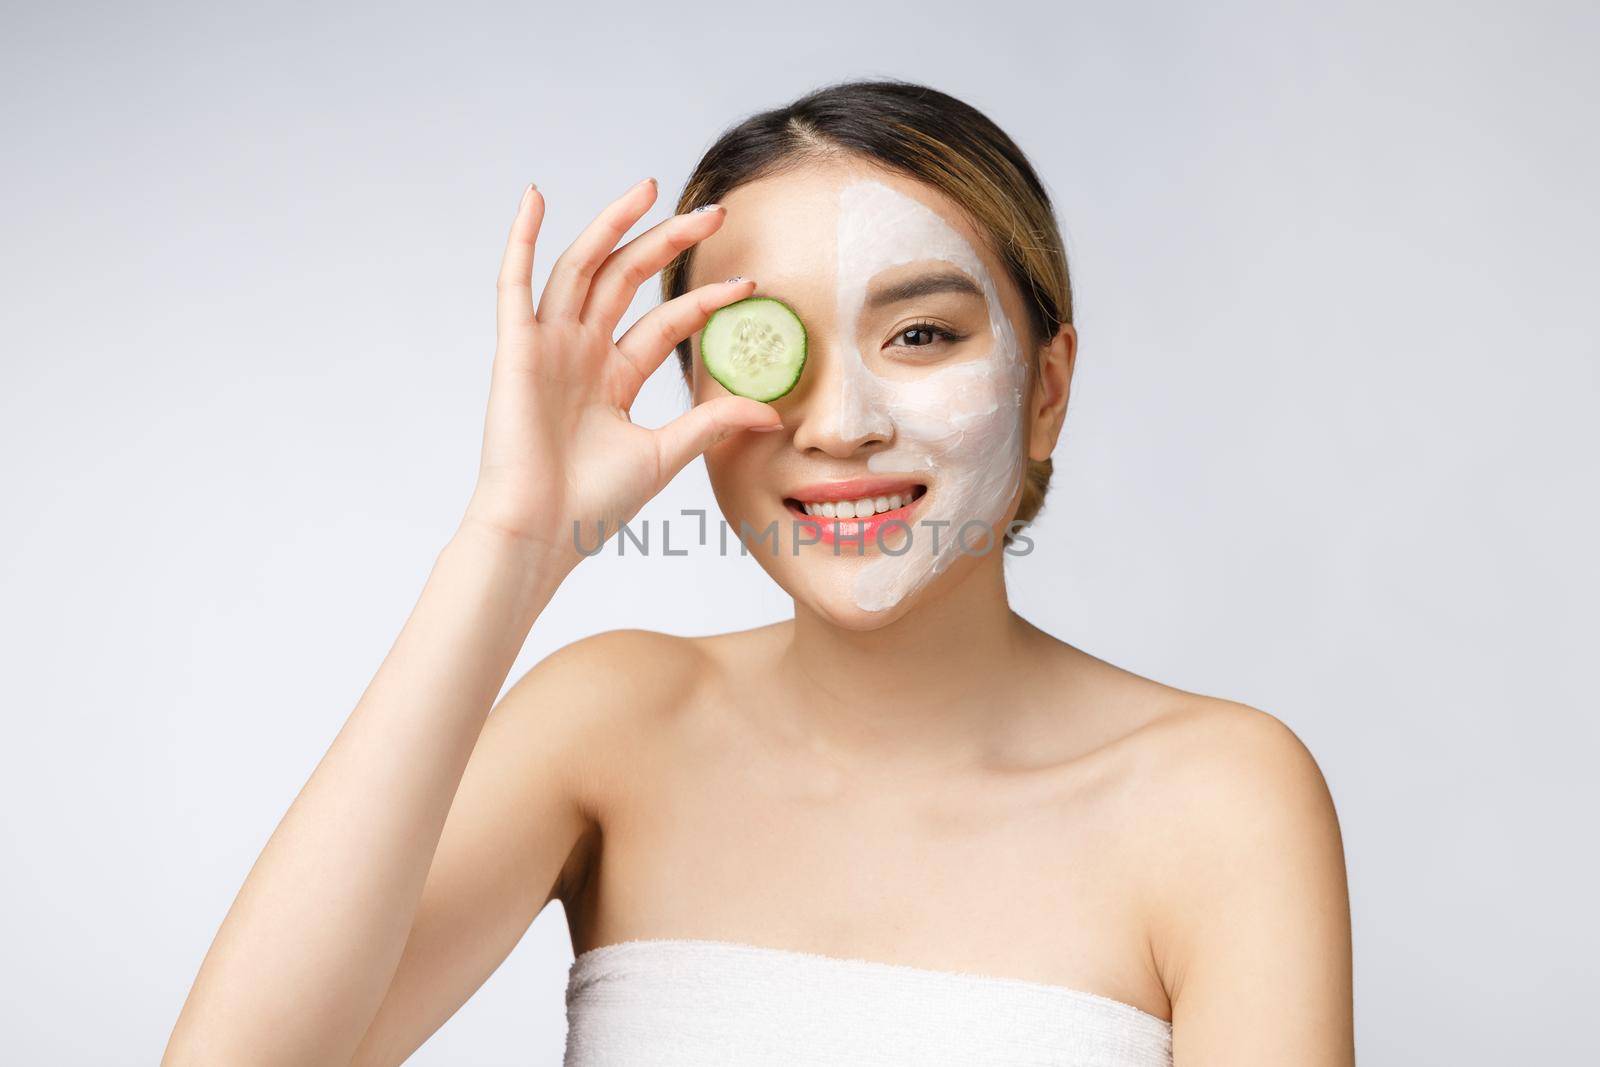 Asian young beautiful smiling woman with flawless complexion holding cucumber slices over eye